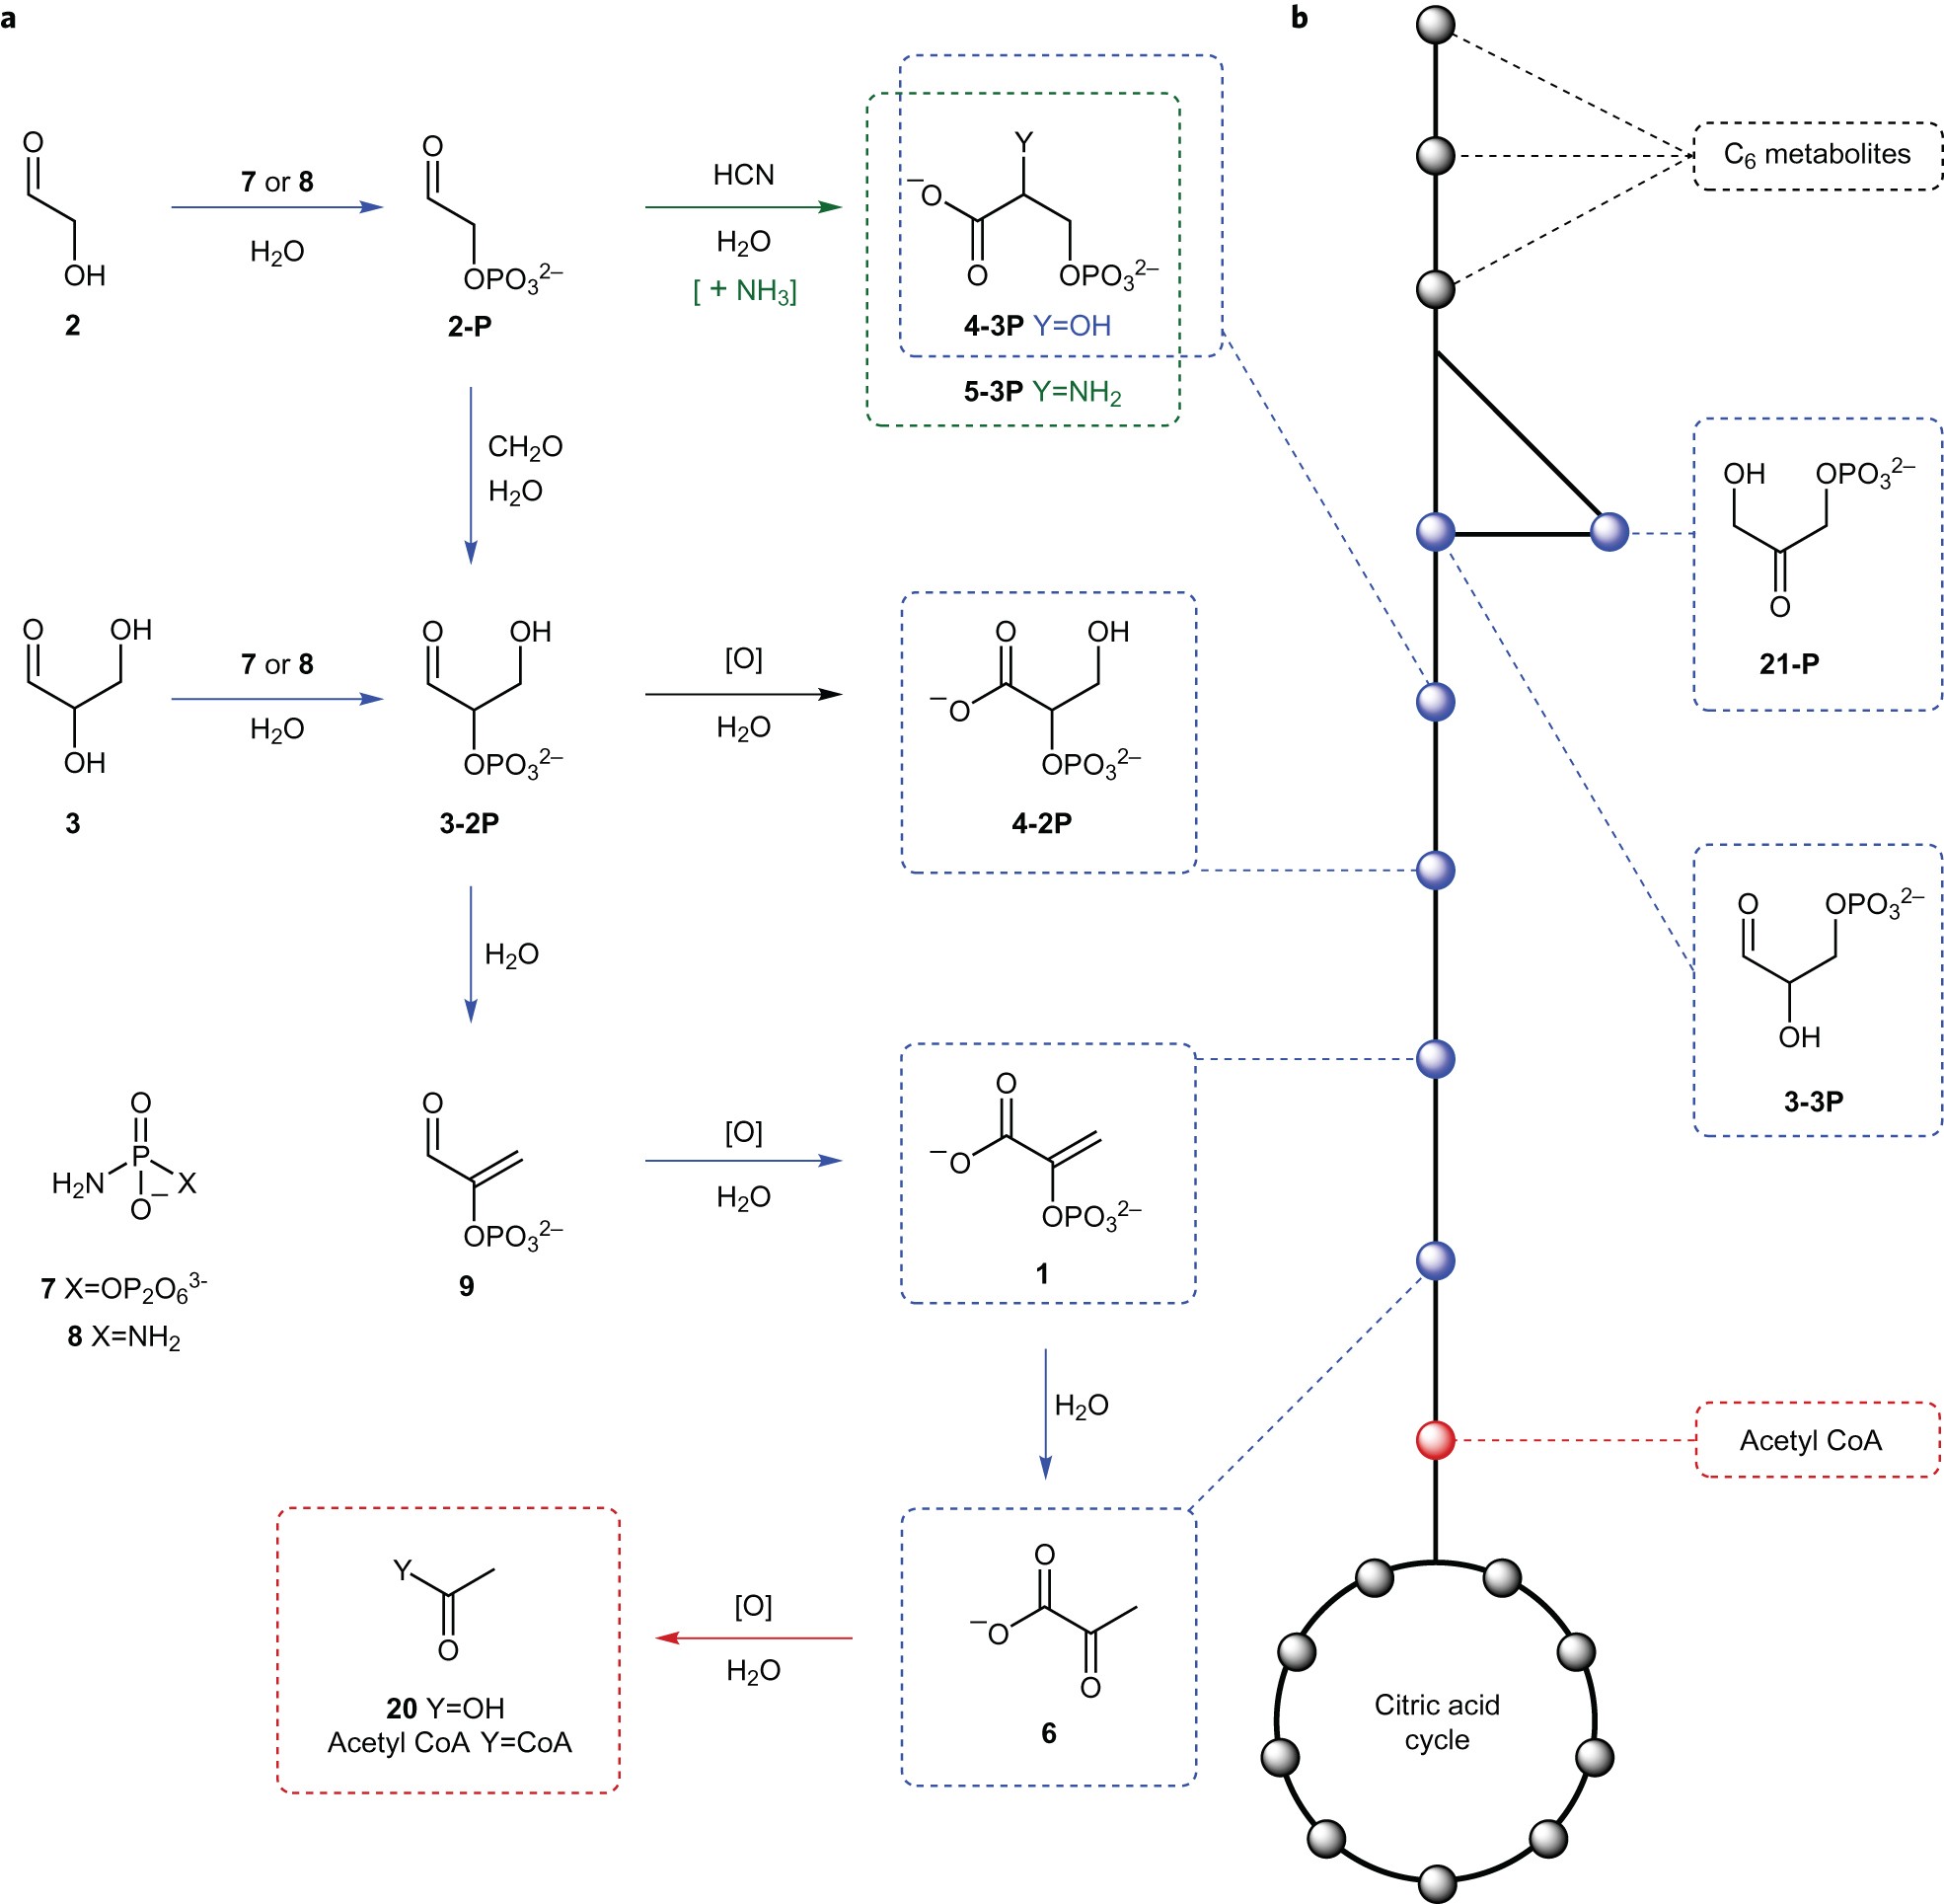 Prebiotic synthesis of phosphoenol pyruvate by α-phosphorylation-controlled triose glycolysis Nature Chemistry